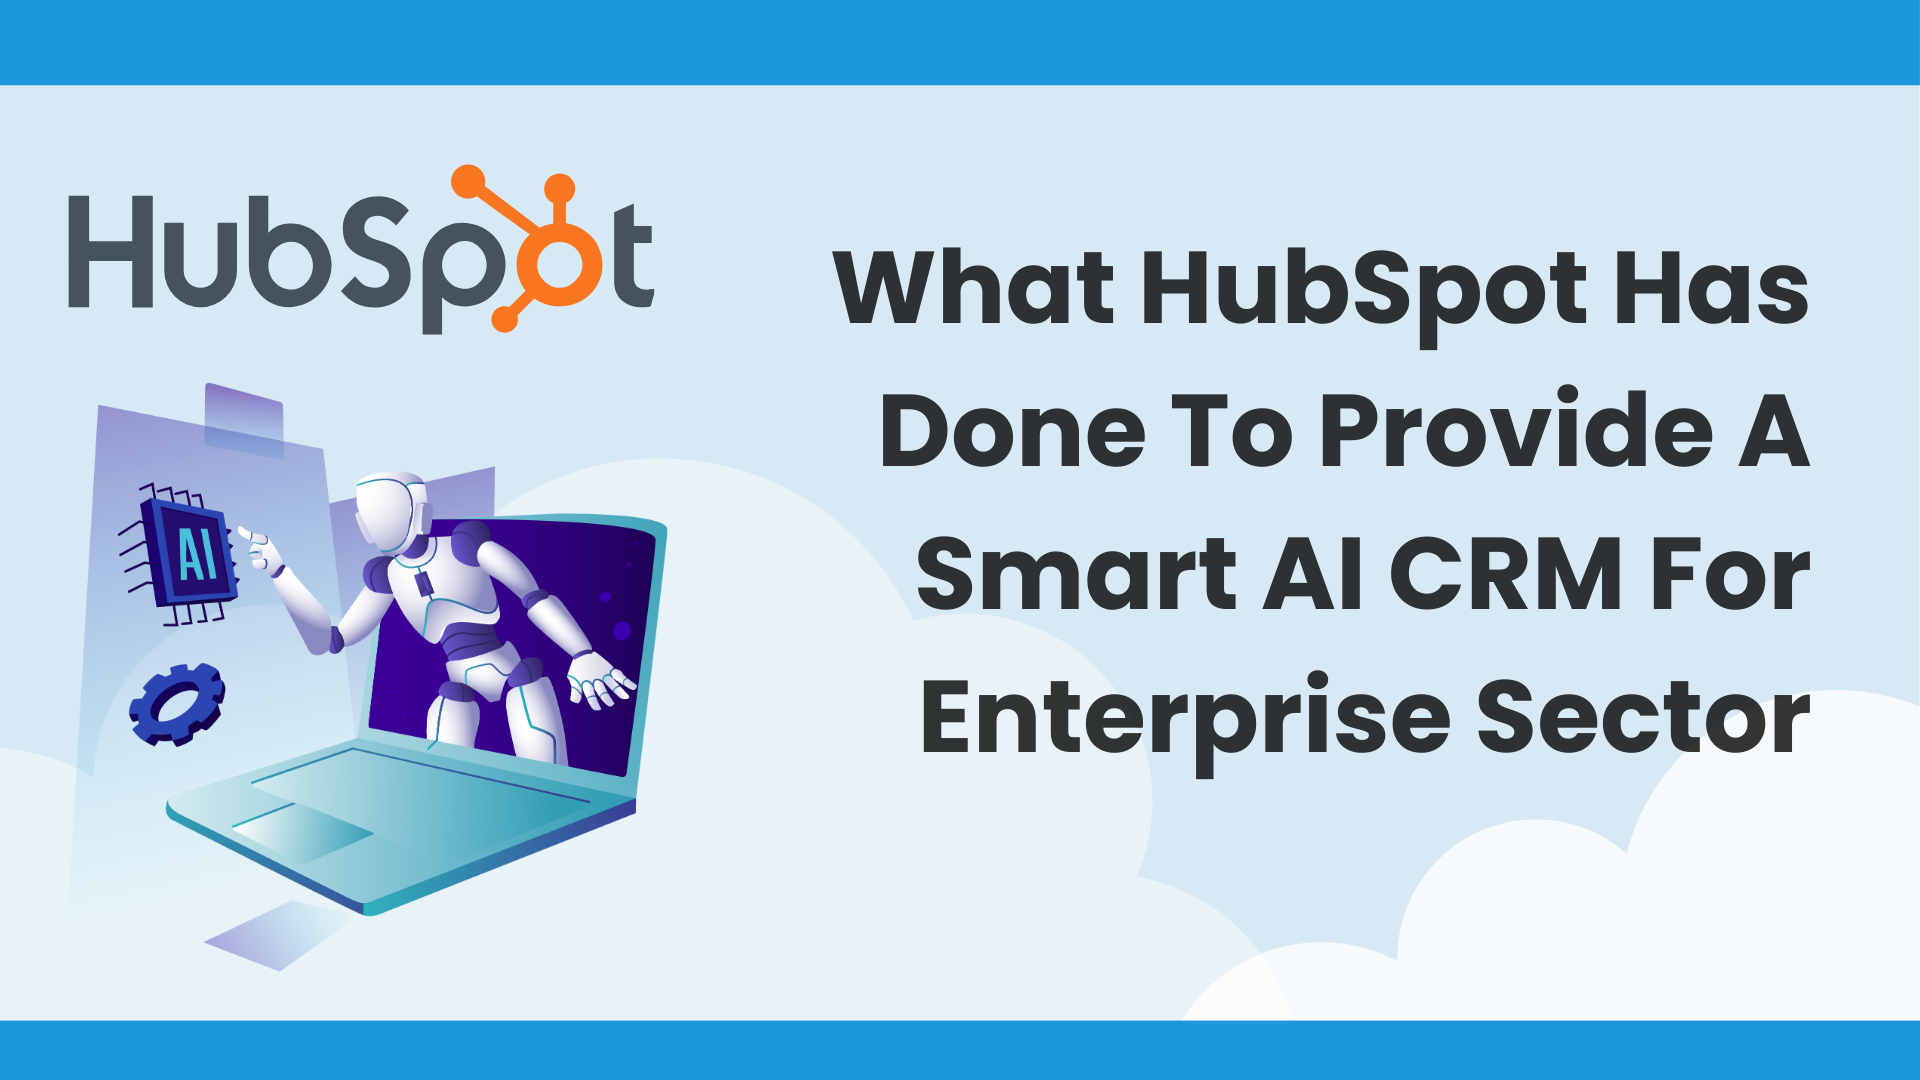 What Hubspot Has Done To Provide A Smart AI CRM For Enterprise Sector